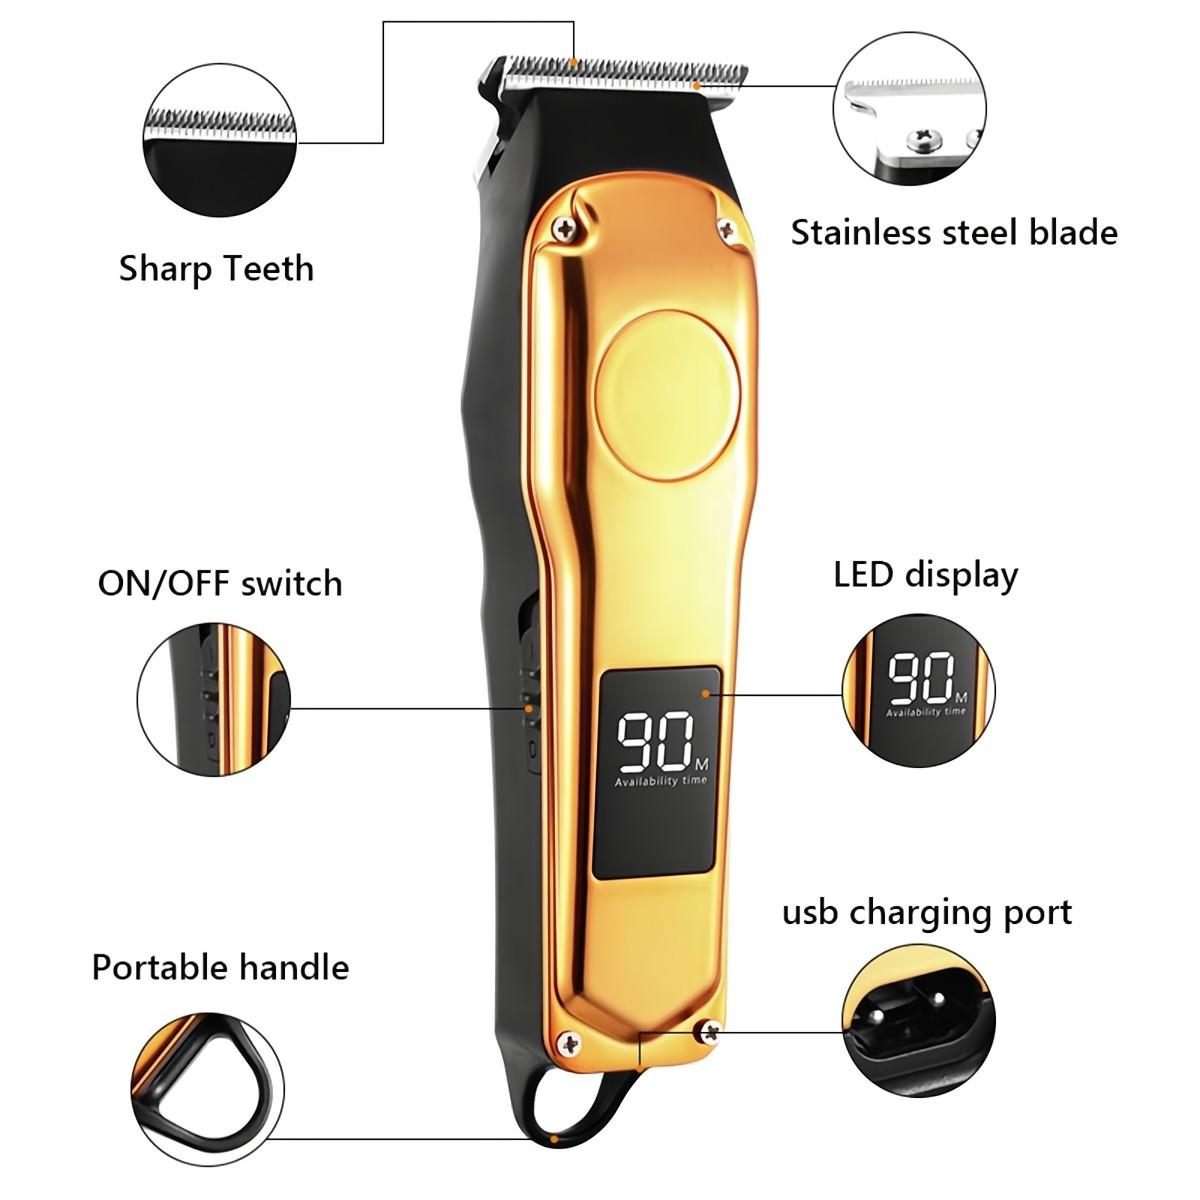 Men Barber Hair Clipper Rechargeable Electric Cutting Machine Beard Trimmer  Comb